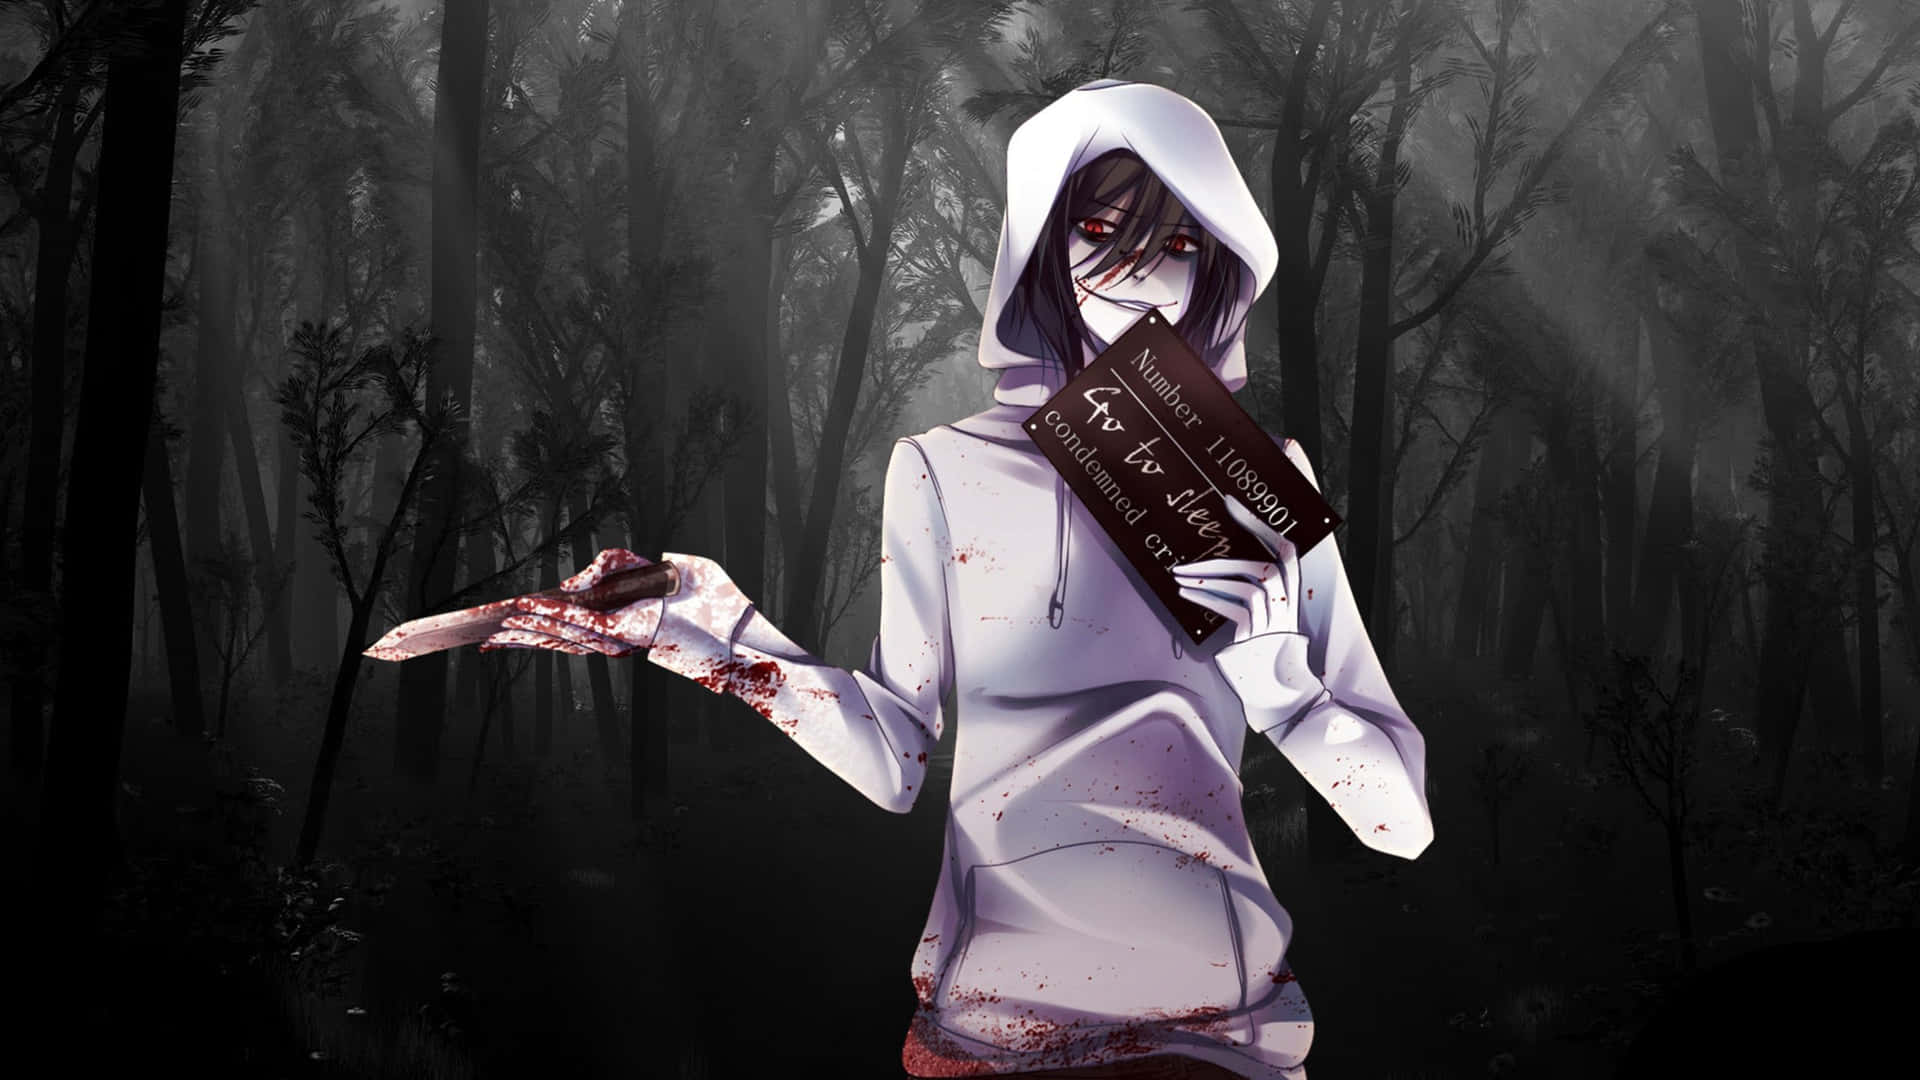 "The Iconic Jeff The Killer, Mystifying the World"